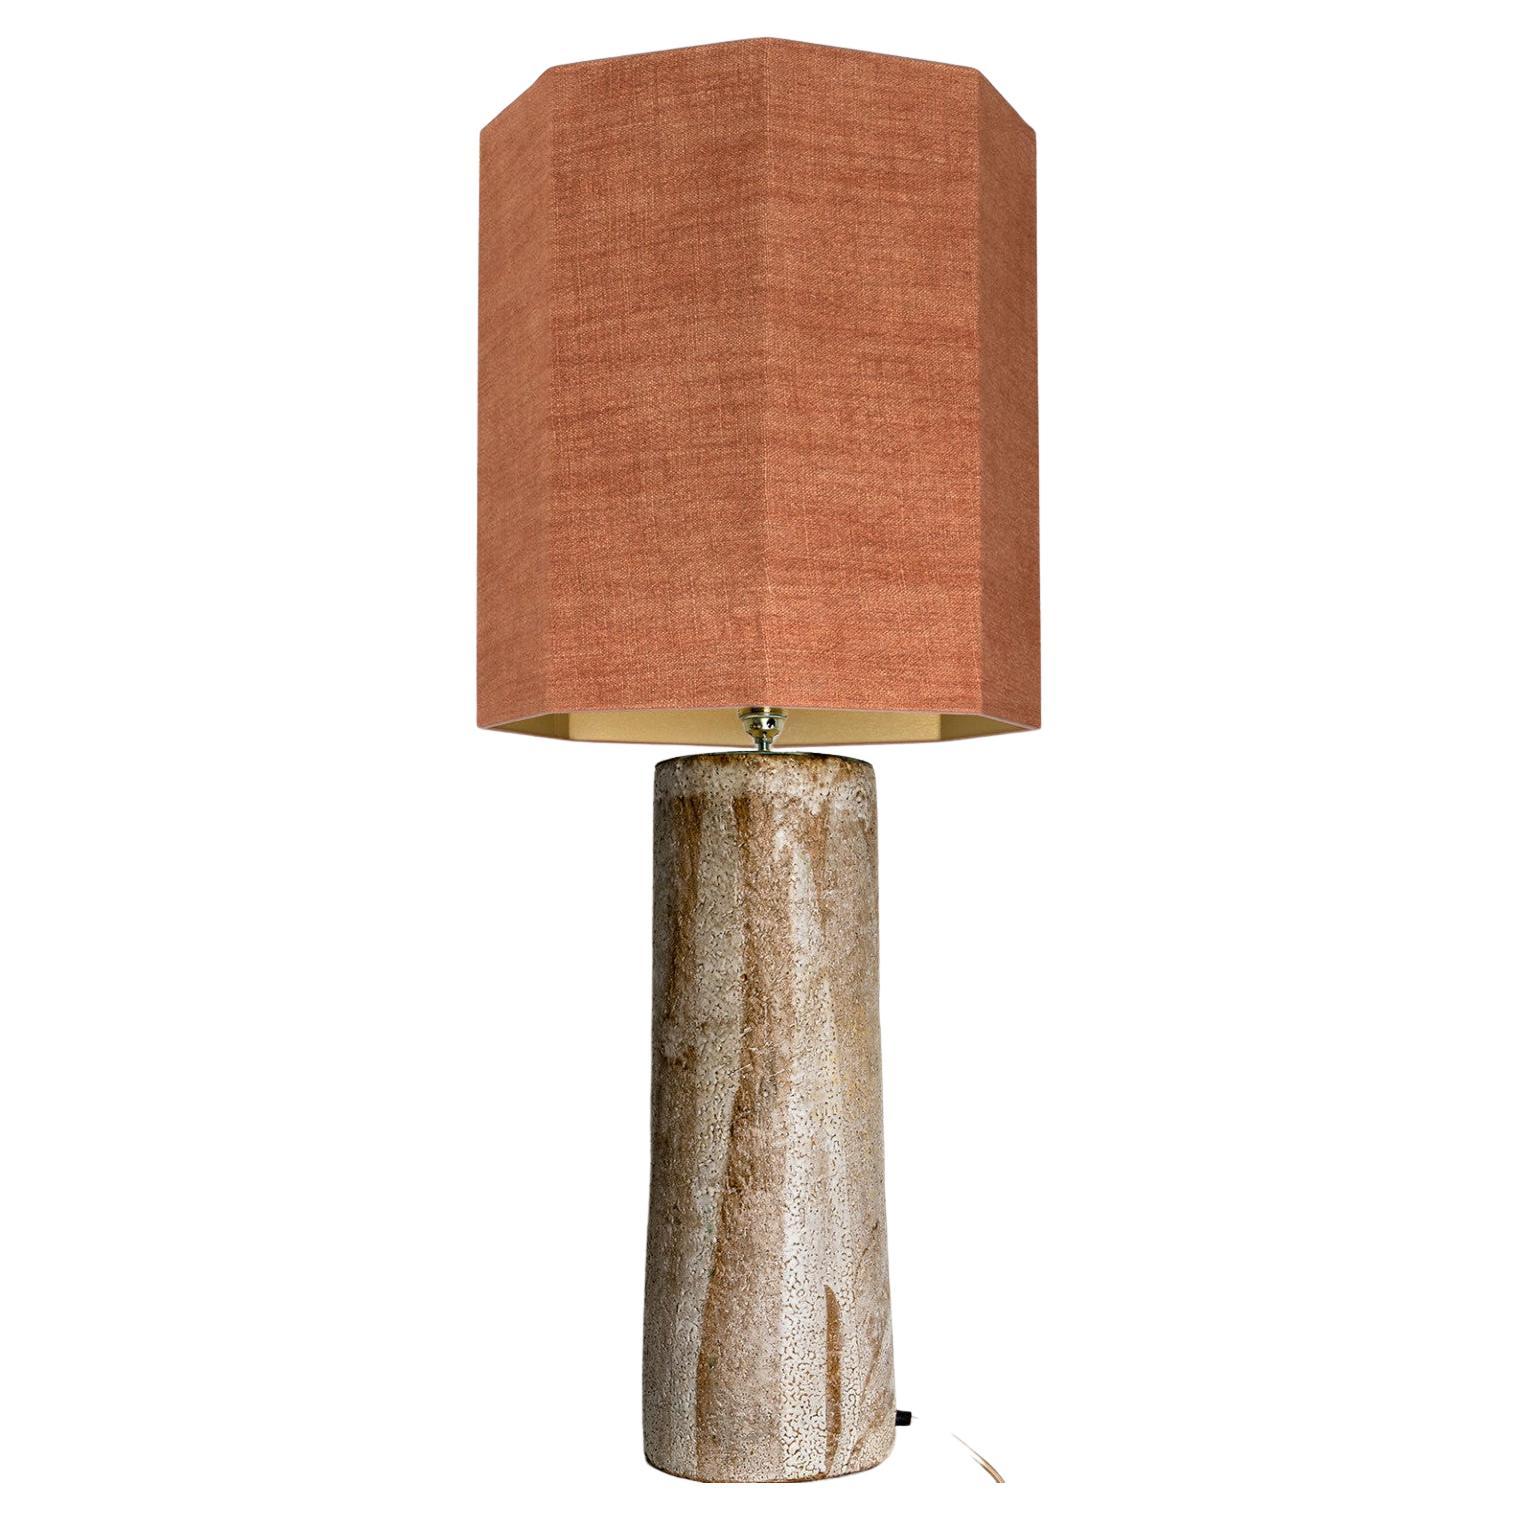 Ceramic Table Lamp with Custom Made Lampshade by René Houben